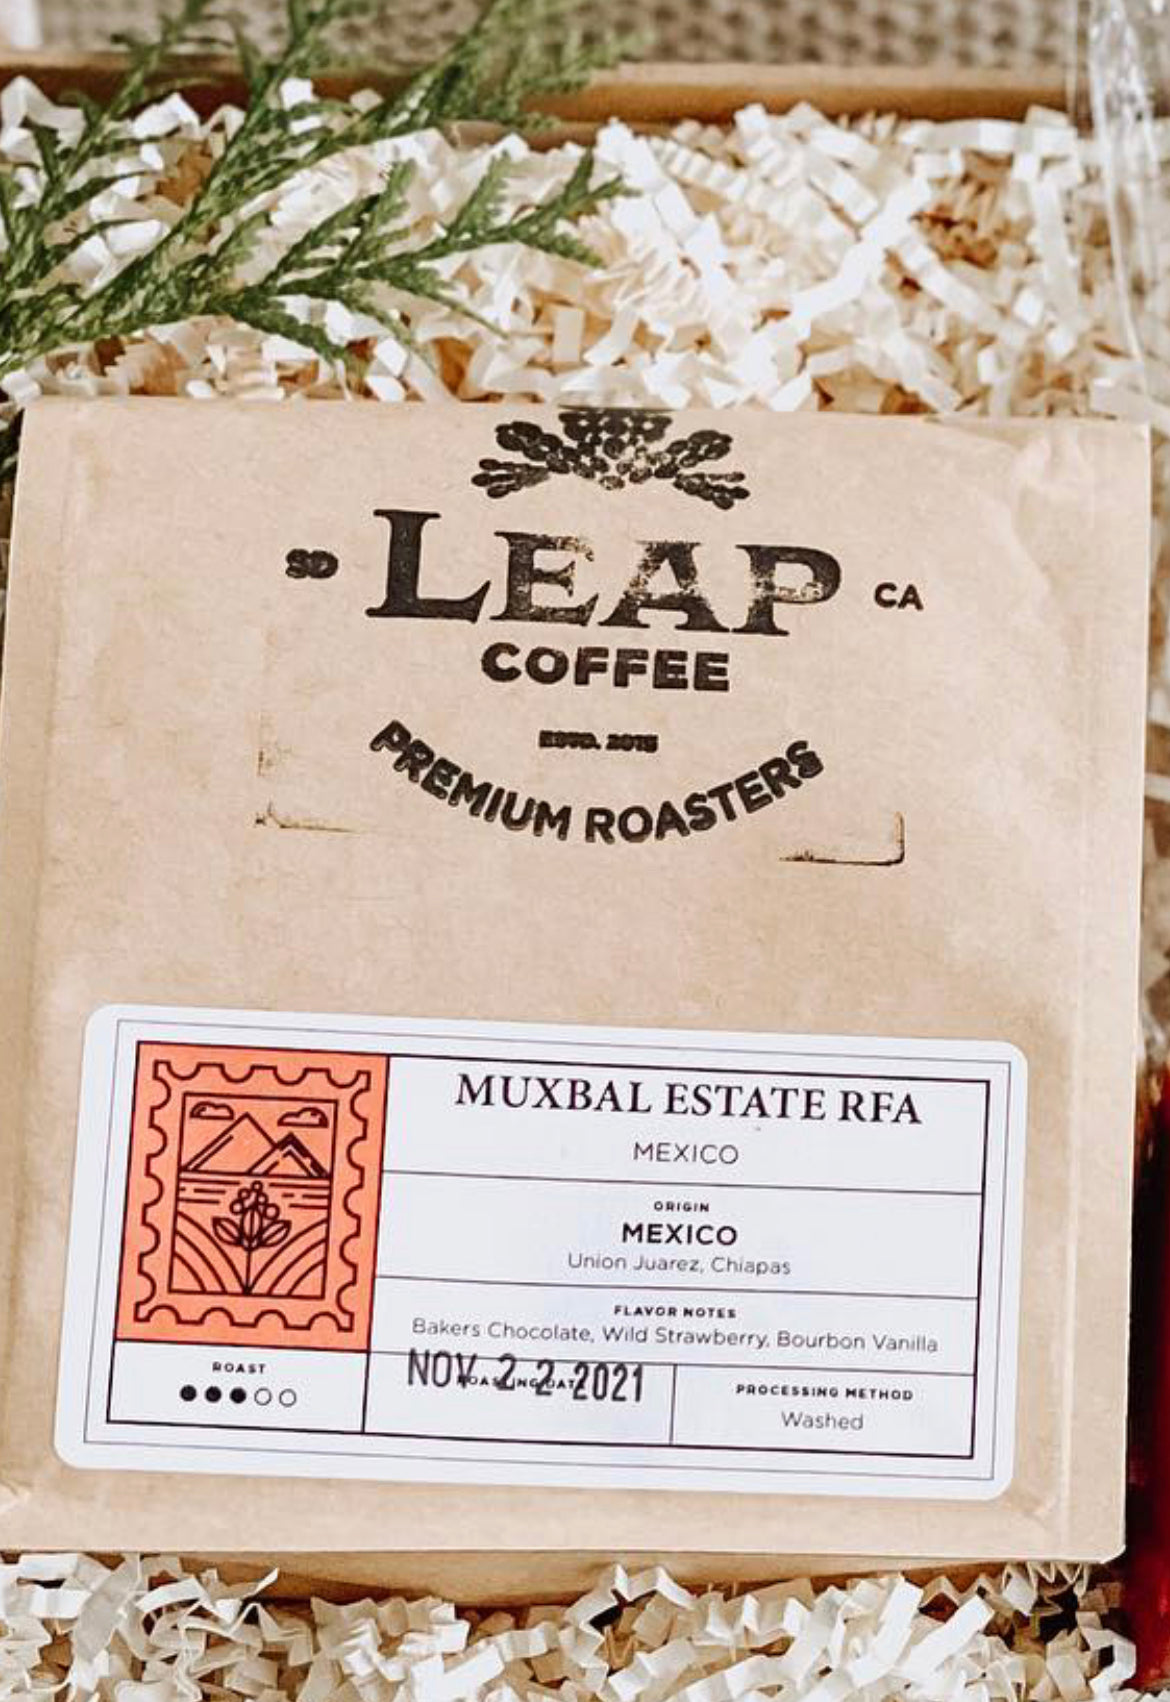 Leap Cheers Blend Coffee